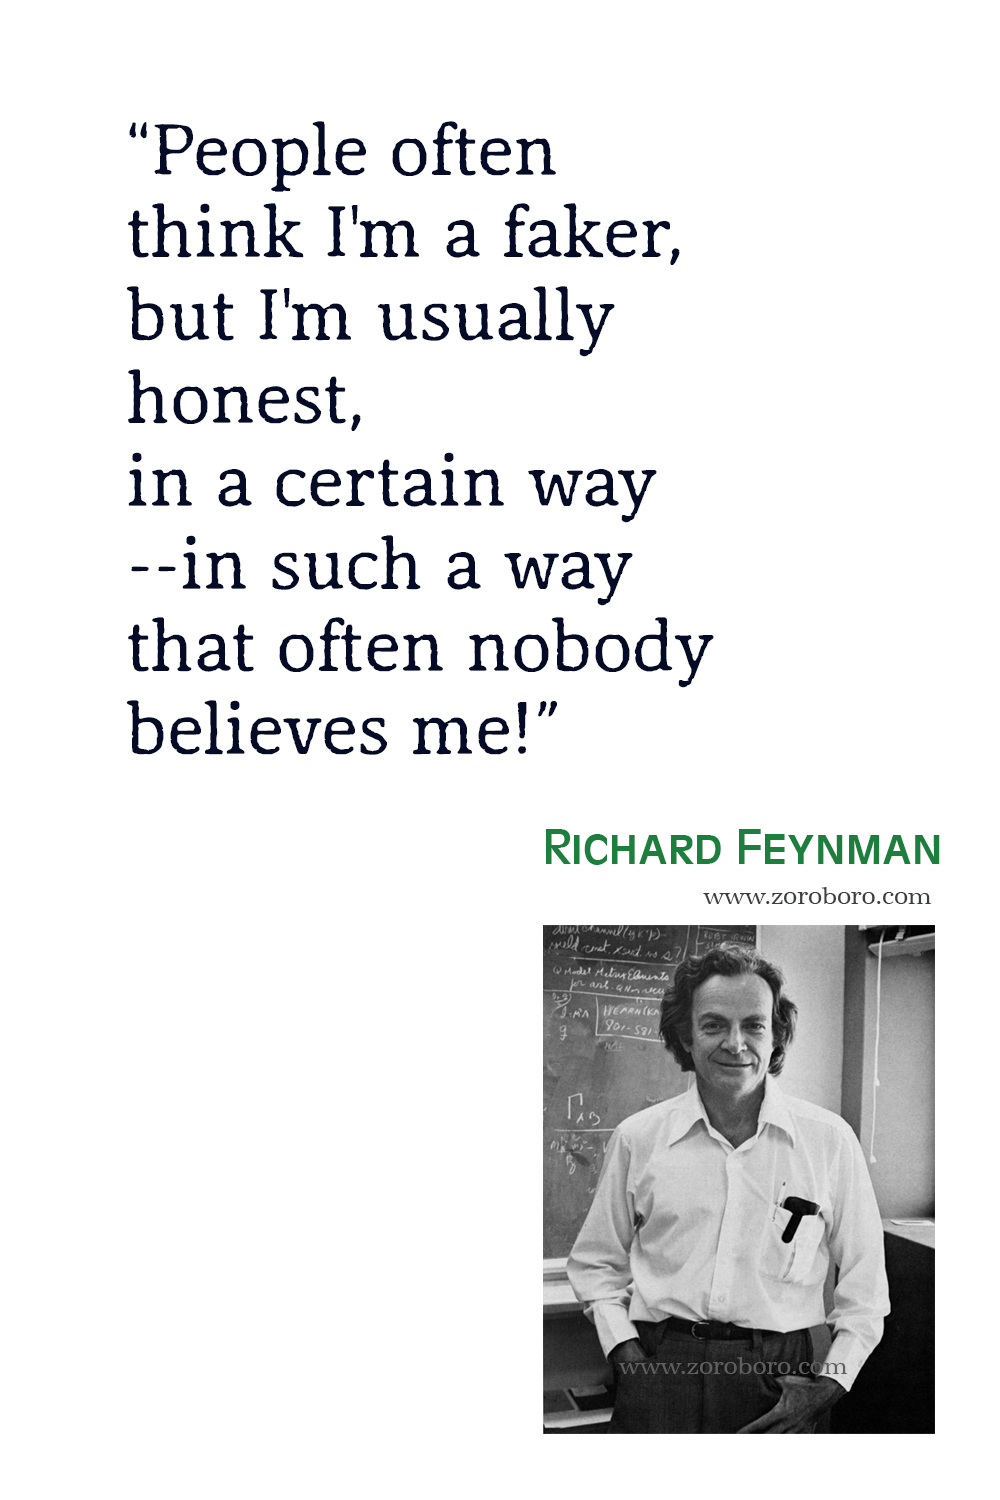 Richard Feynman Quotes, Richard Feynman, Doubt, Skepticism, Inspirational, Life, Science Quotes, The Feynman Lectures on Physics, Richard Feynman Books Quotes